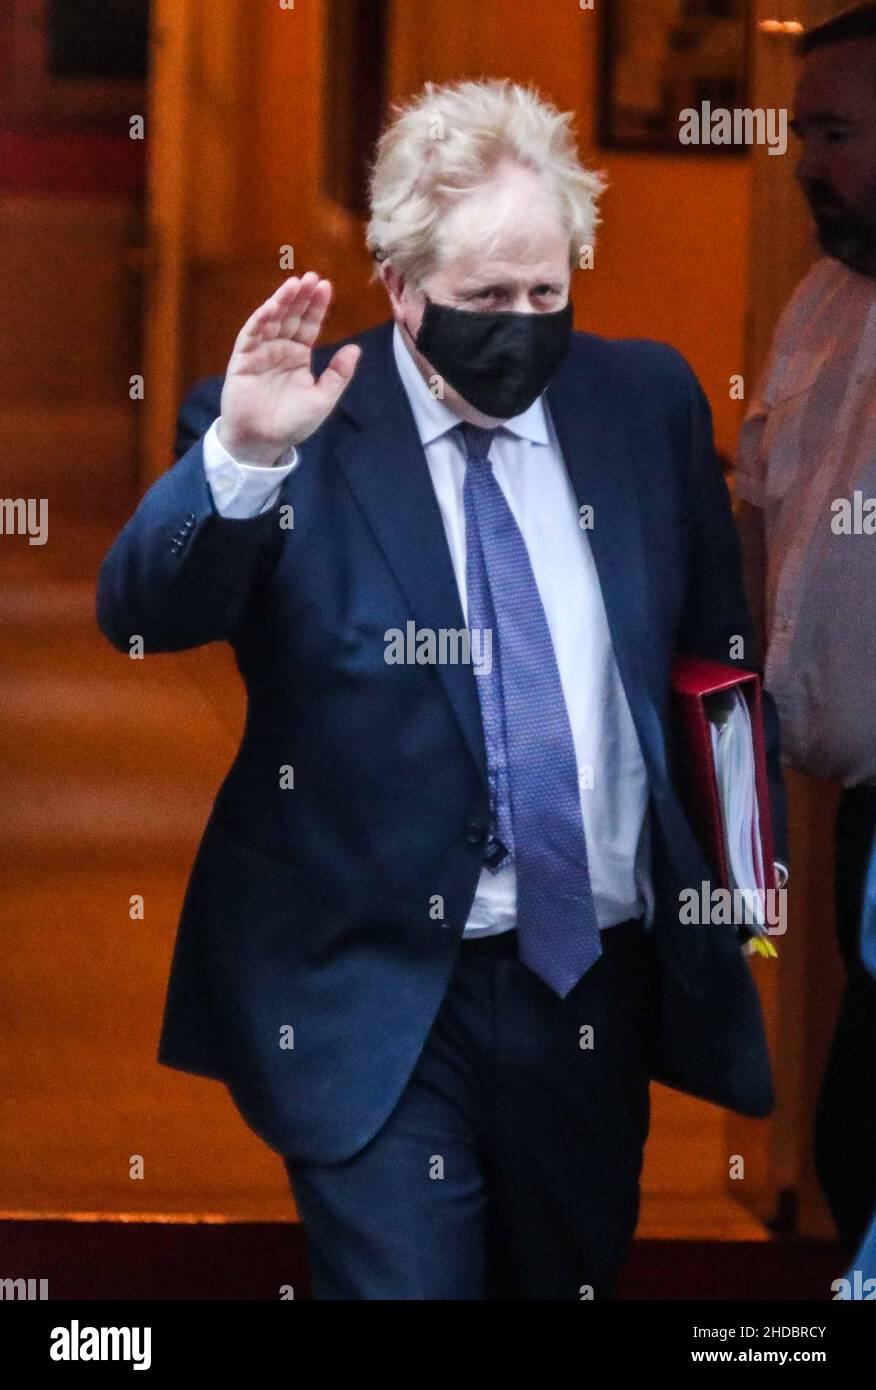 London UK 05 January 2022 Primer Minister Boris Johnson leaving 10 Downing Street  to attend his first PMQ's of 2022,with Keir Starmer missing the PMQ's questions  after testing  positive for Covid leaving Deputy leader Angela  Rayner  to lead with the questions. Paul Quezada-Neiman/Alamy Live News Stock Photo